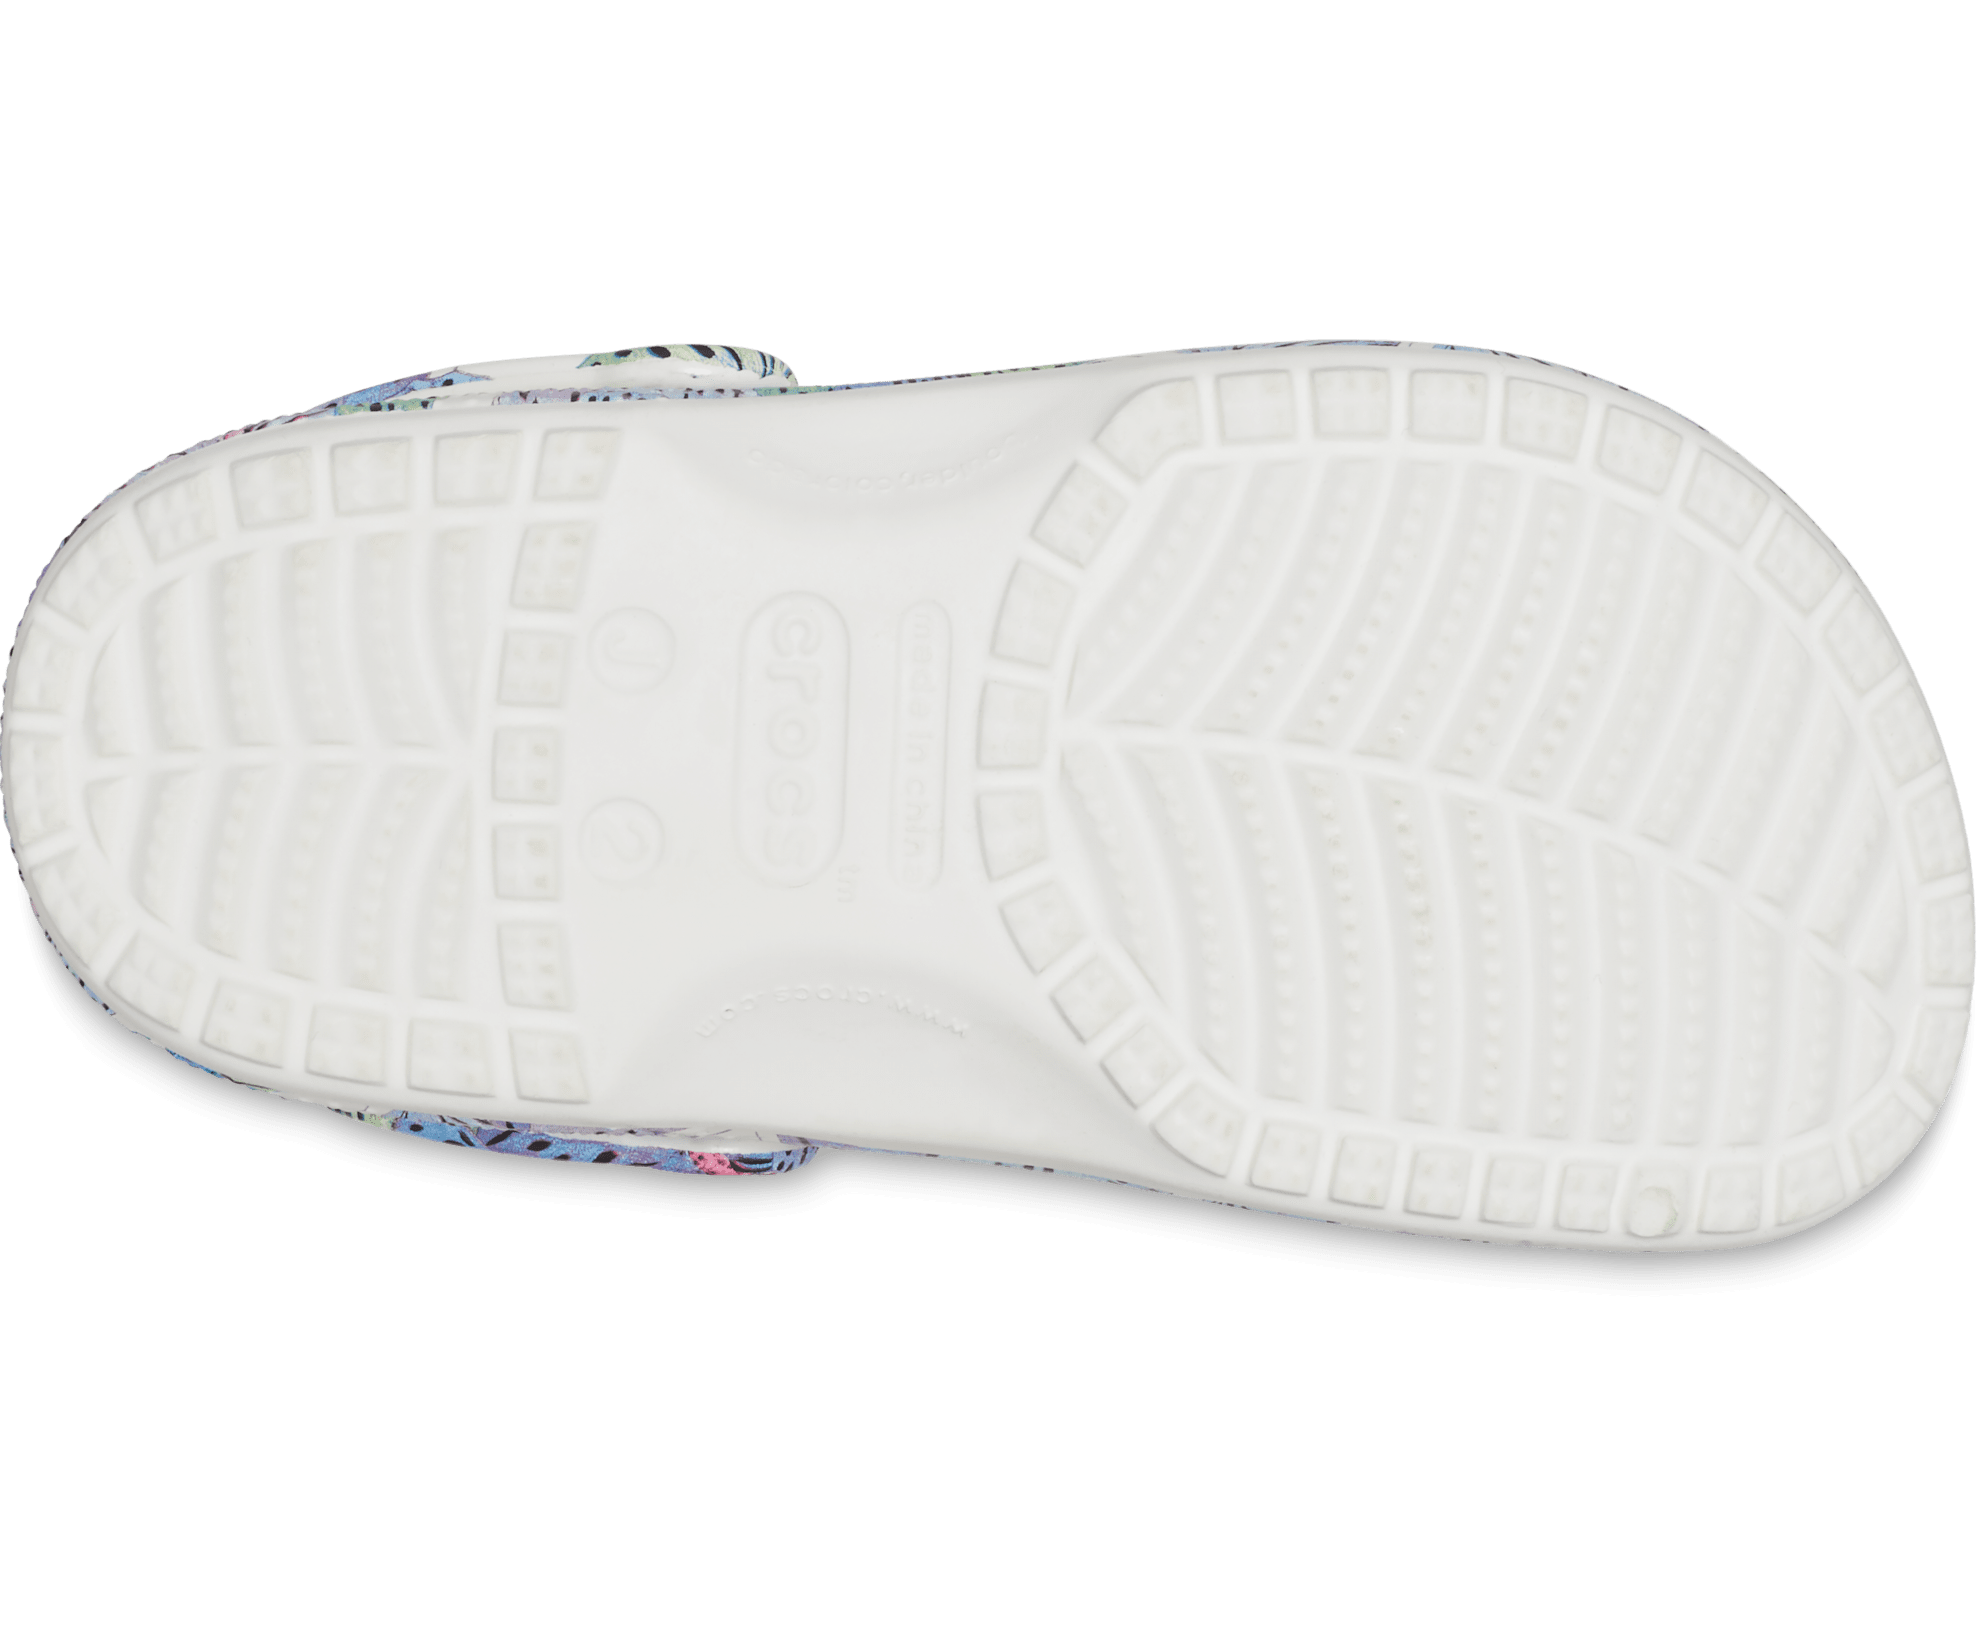 Crocs Kids Classic Butterfly Clog - White